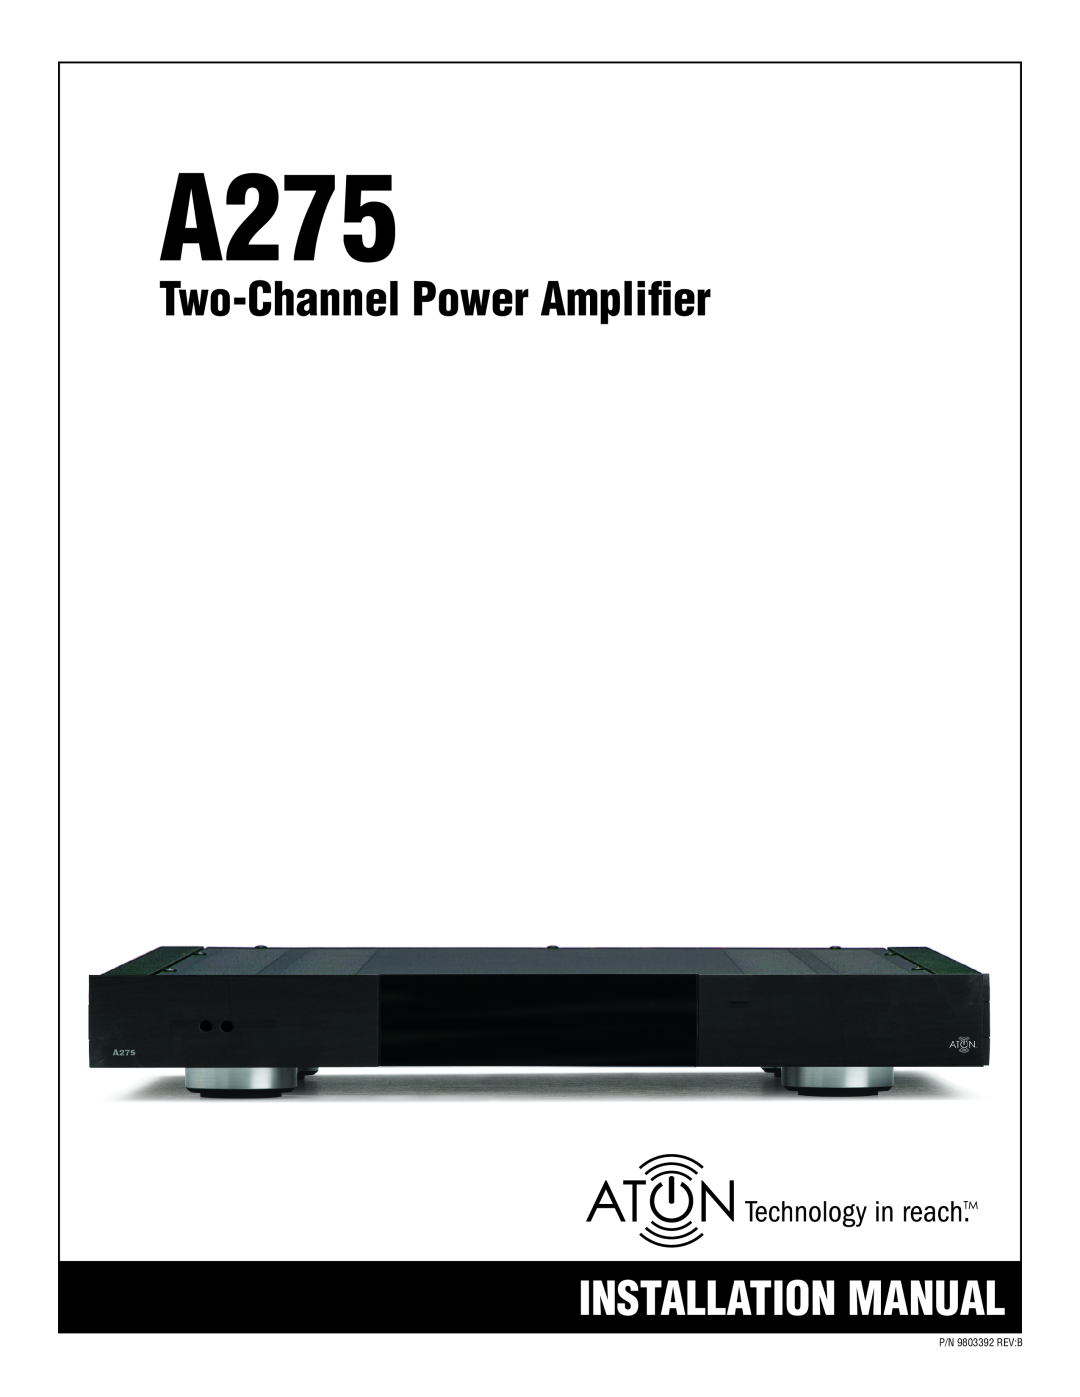 ATON A275 installation manual Two-ChannelPower Amplifier, Installation Manual 